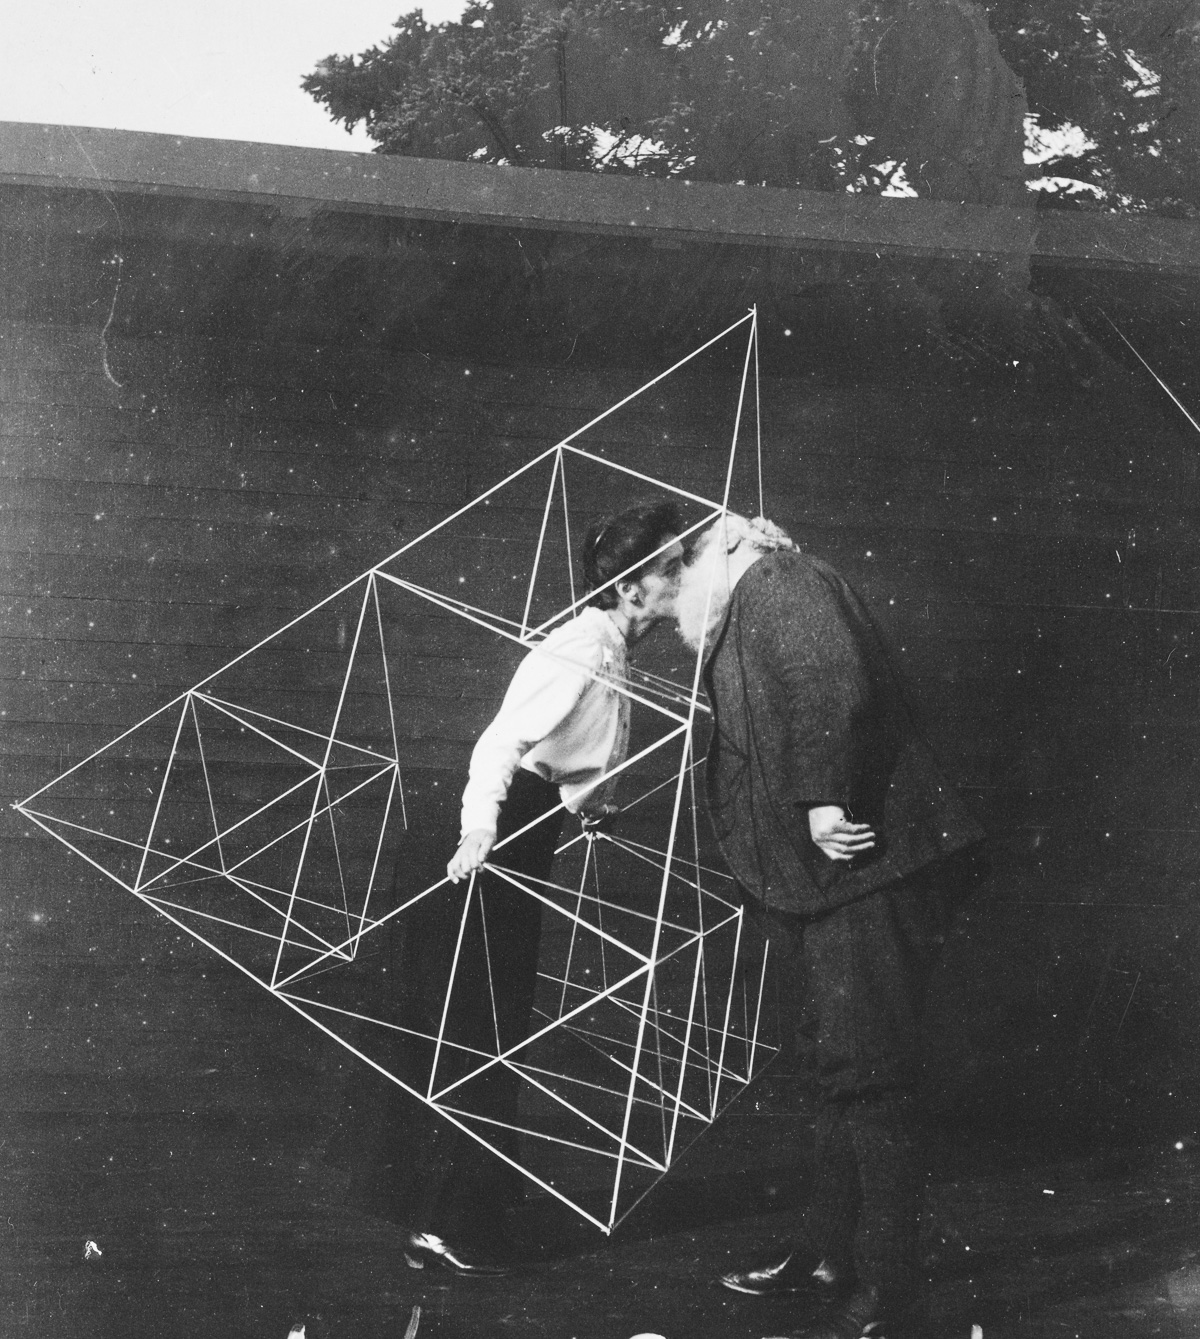 Alexander Graham Bell kisses his wife Mabel Hubbard Gardiner Bell inside a tetrahedral framework.
IMAGE: LIBRARY OF CONGRESS